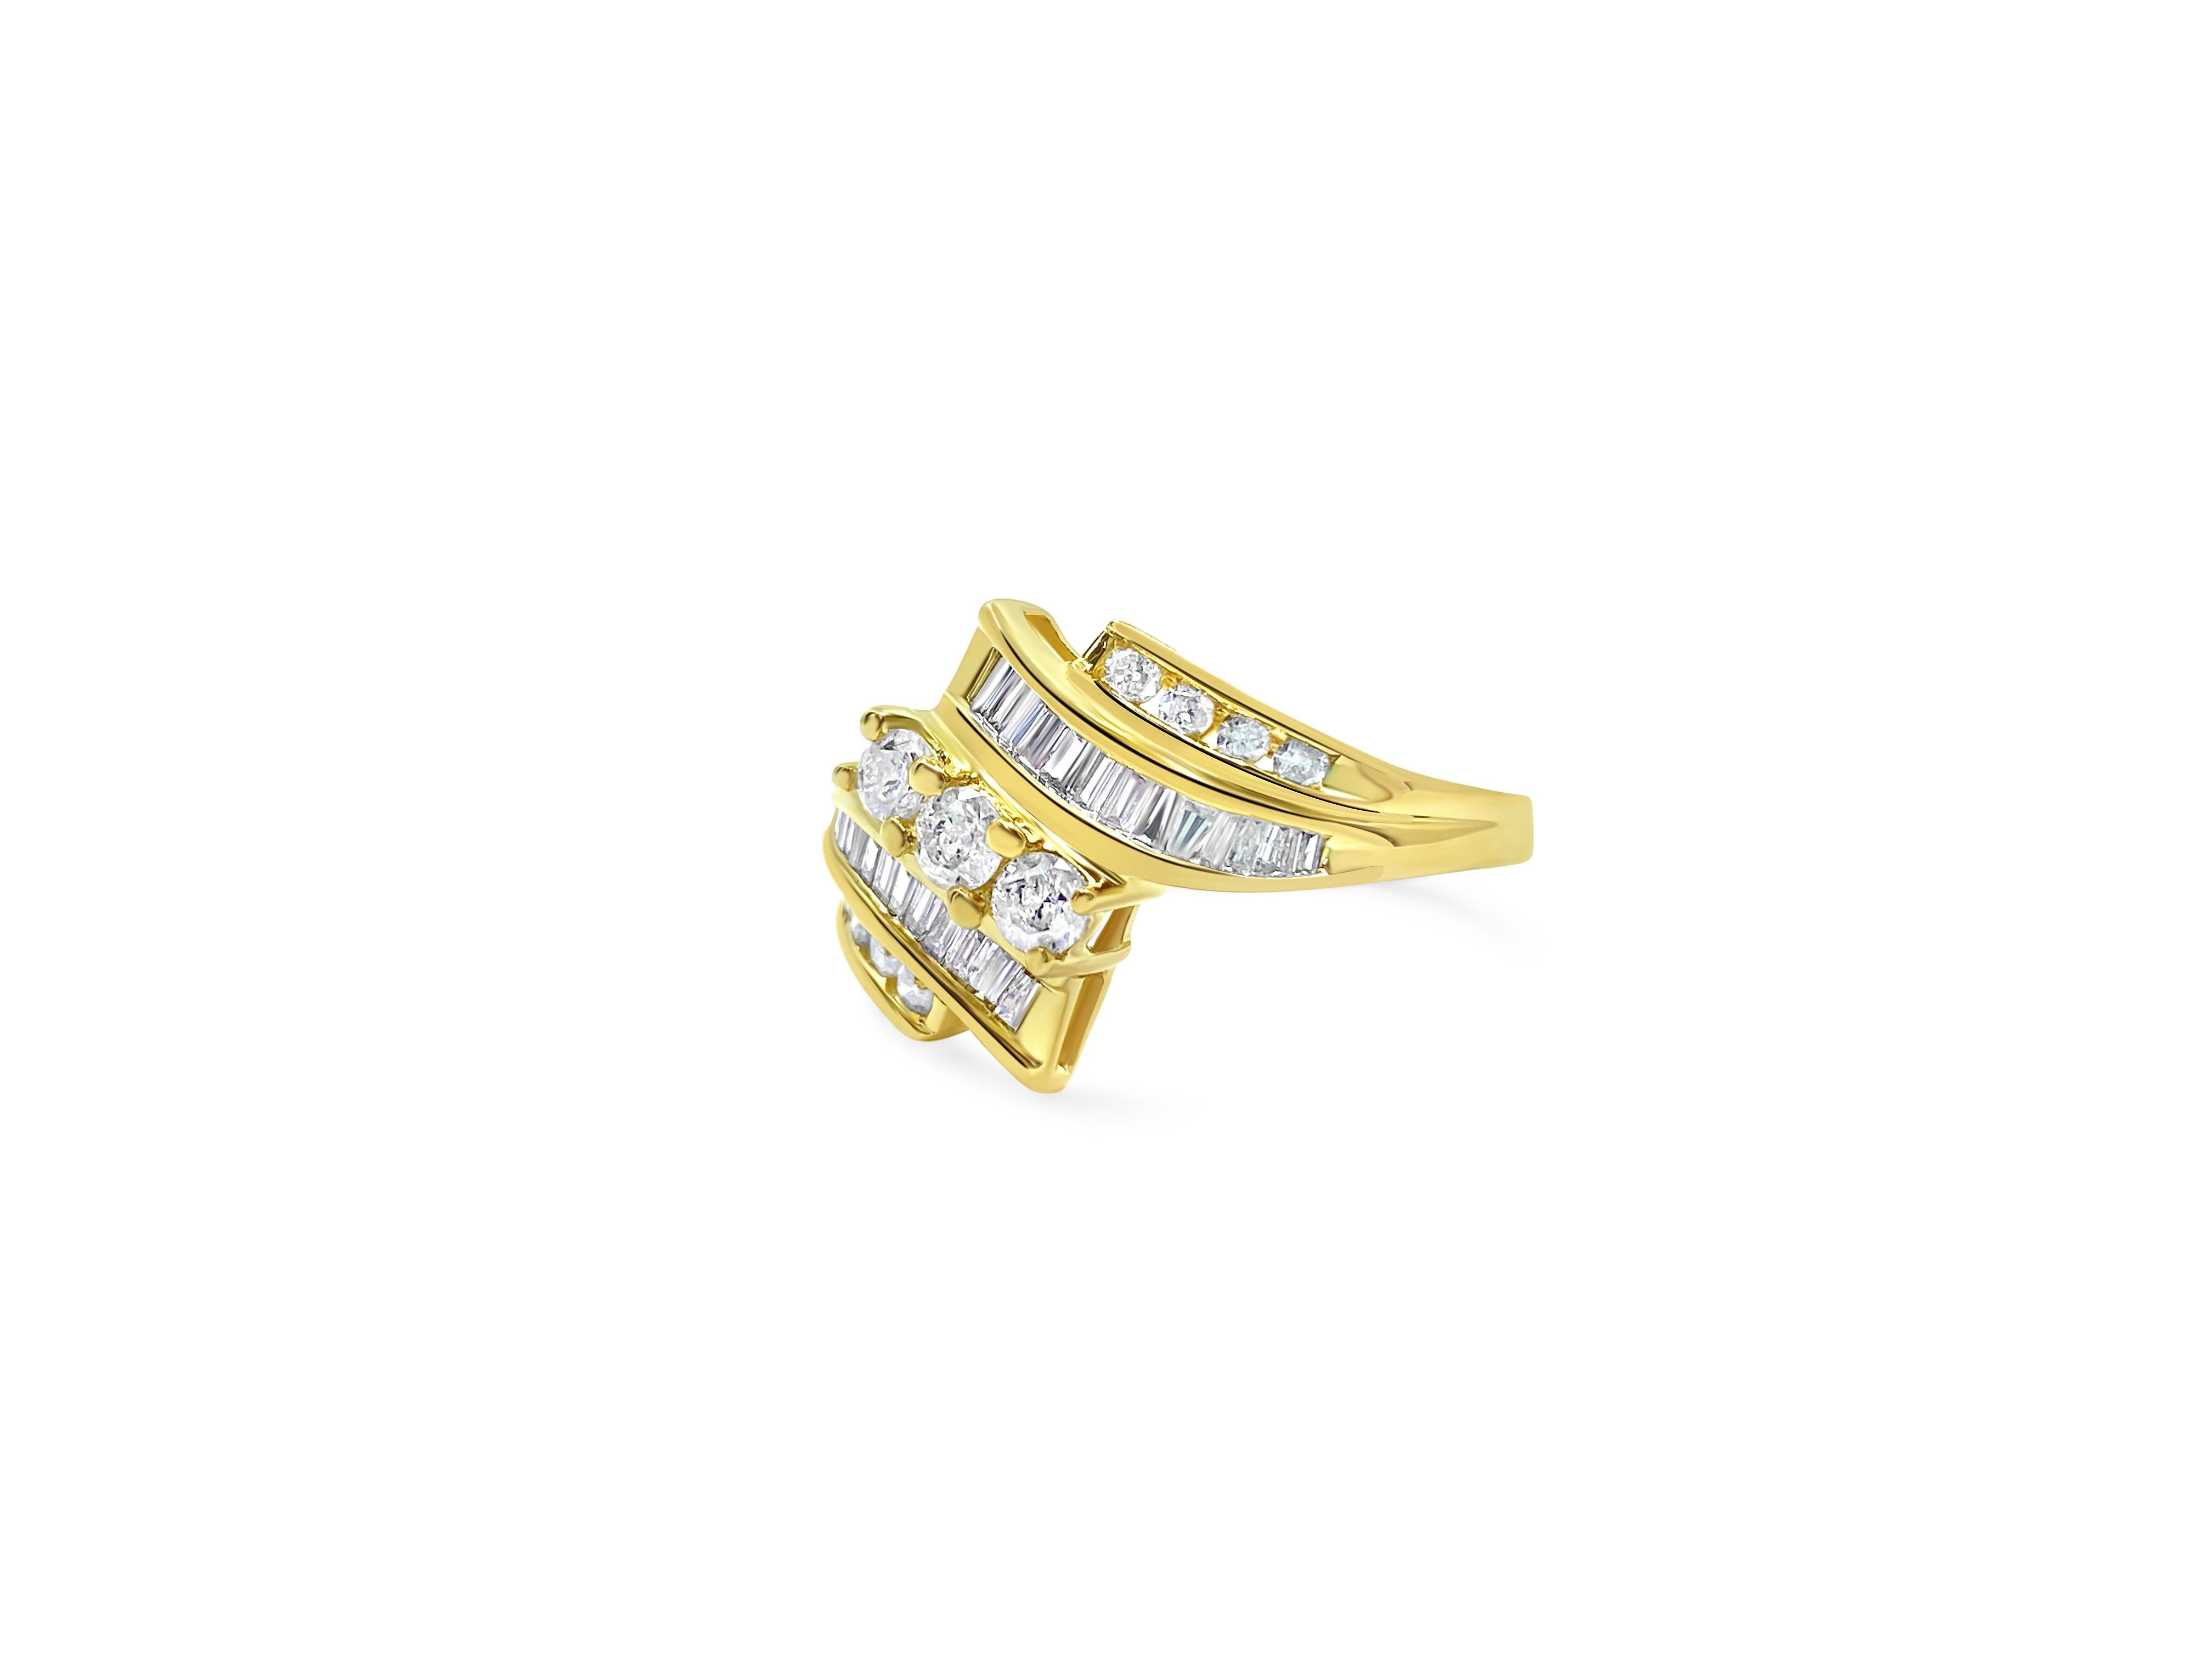 Step into elegance with our stunning 10k Yellow Gold Diamond Ring, featuring a total diamond weight of 1.78 carats. Each diamond, boasting VS-SI clarity and G-H color, is meticulously selected for its natural brilliance and radiance. With a total